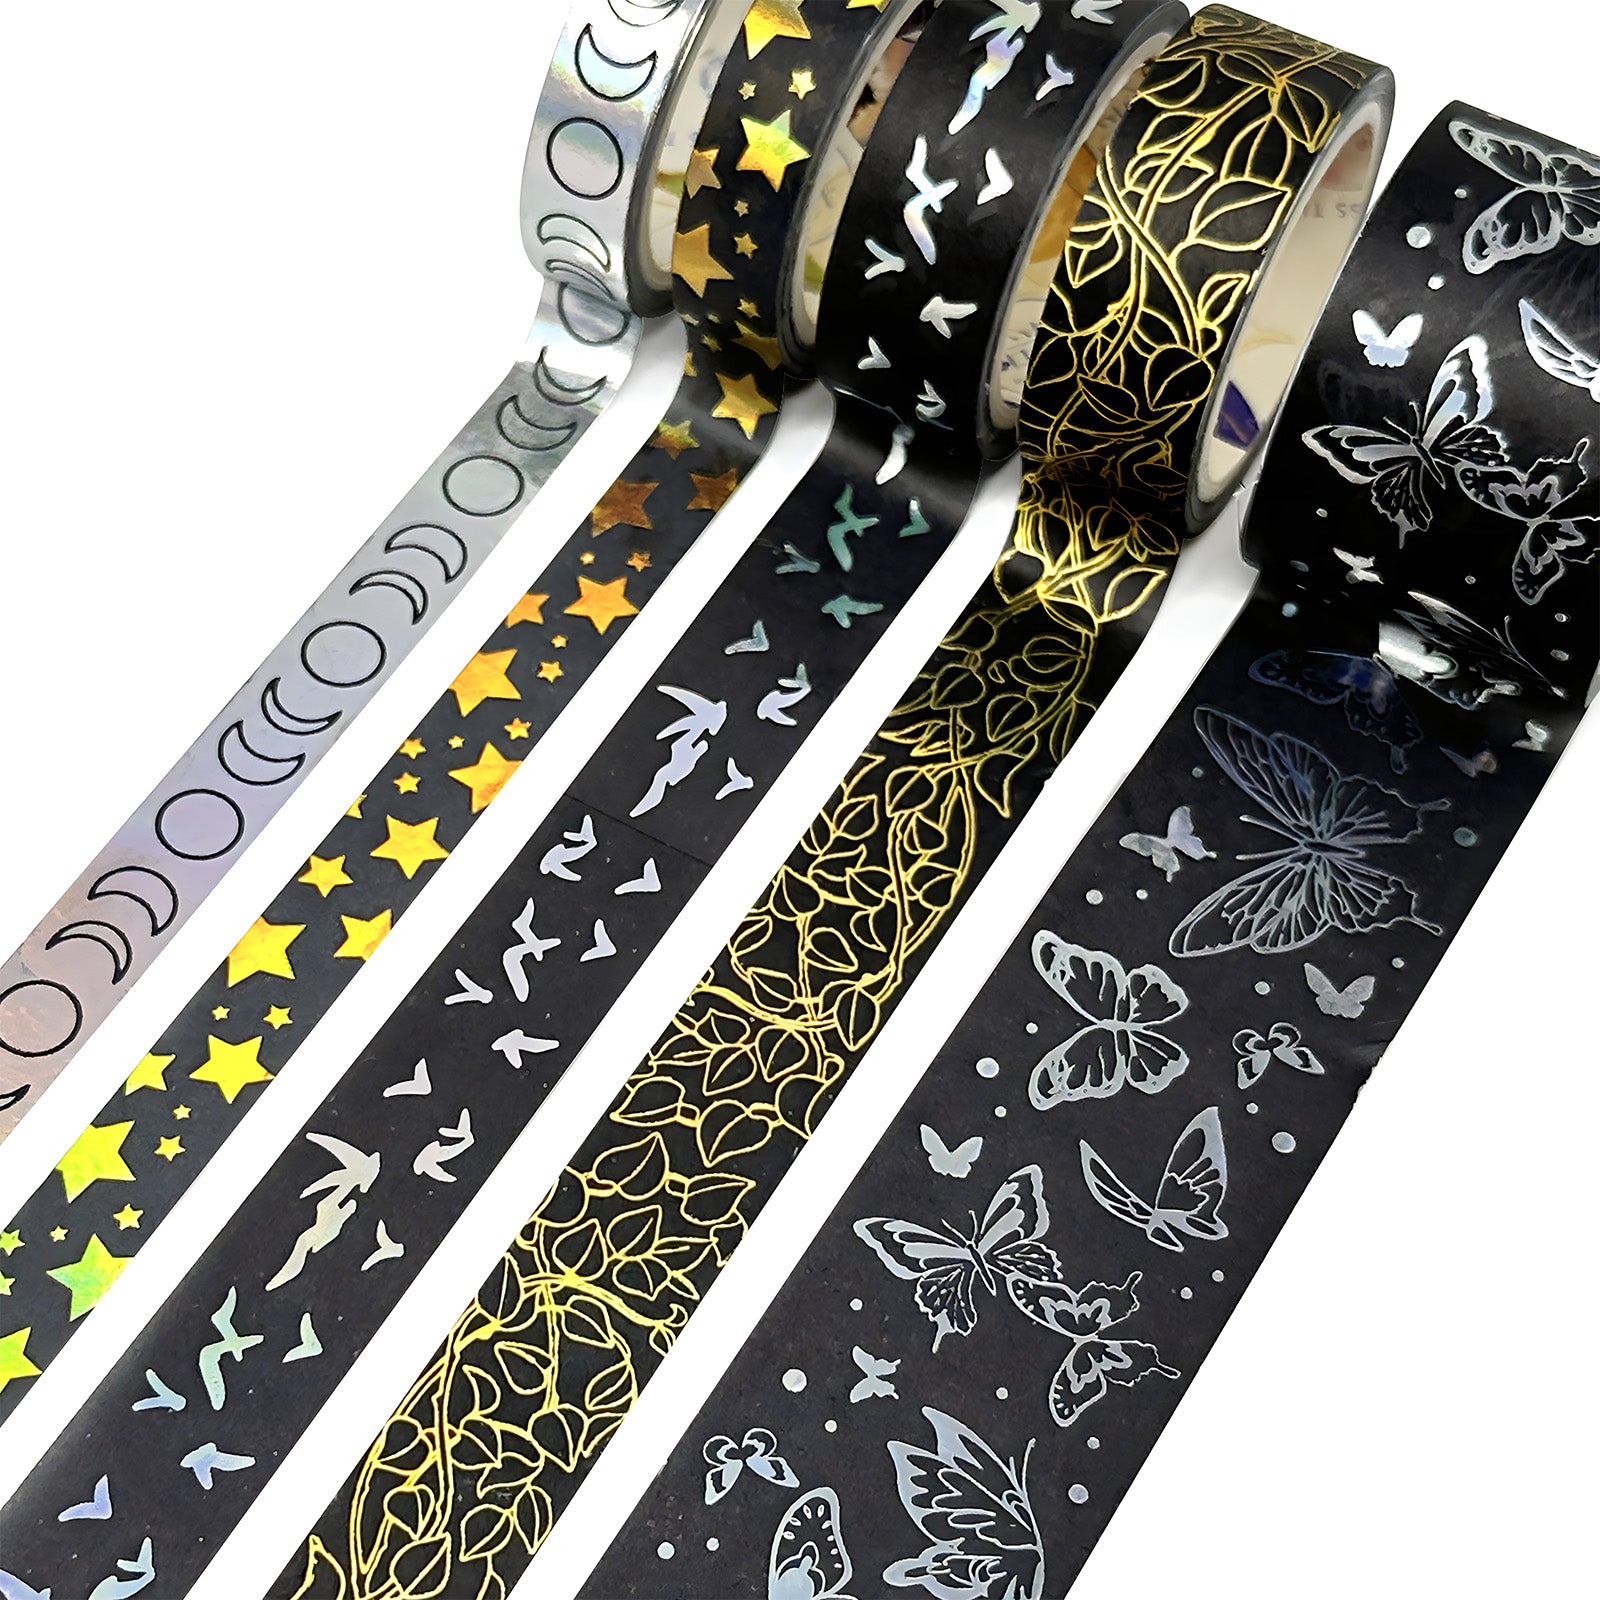 Foil Gold Rainbow Washi Tape Full Set, Card Scrapbooking Tape, Gift  Wrapping Tape Skinny 3mm X 5M Set of 24 No.12032 